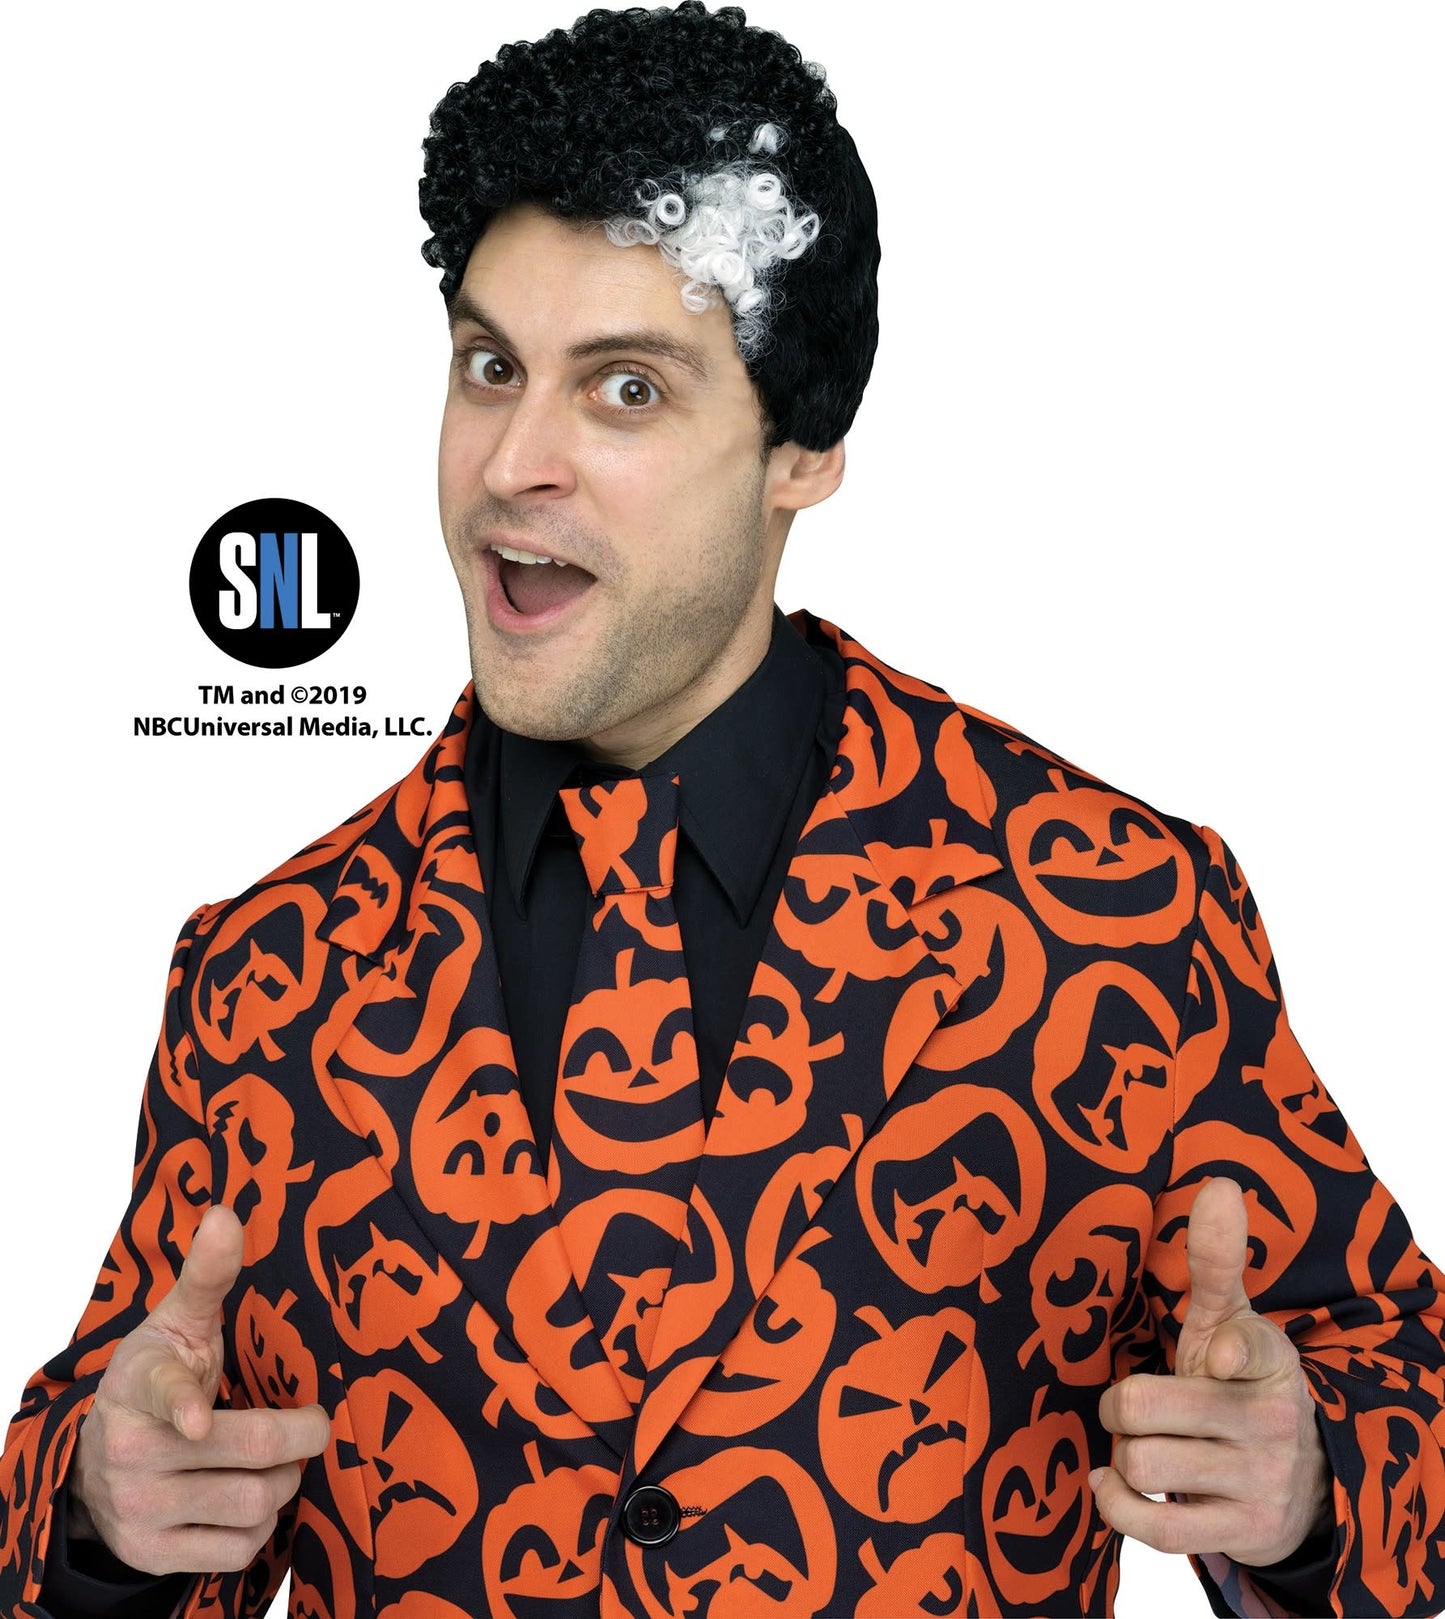 A man dressed up wearing a David S. Pumpkins wig from SNL.